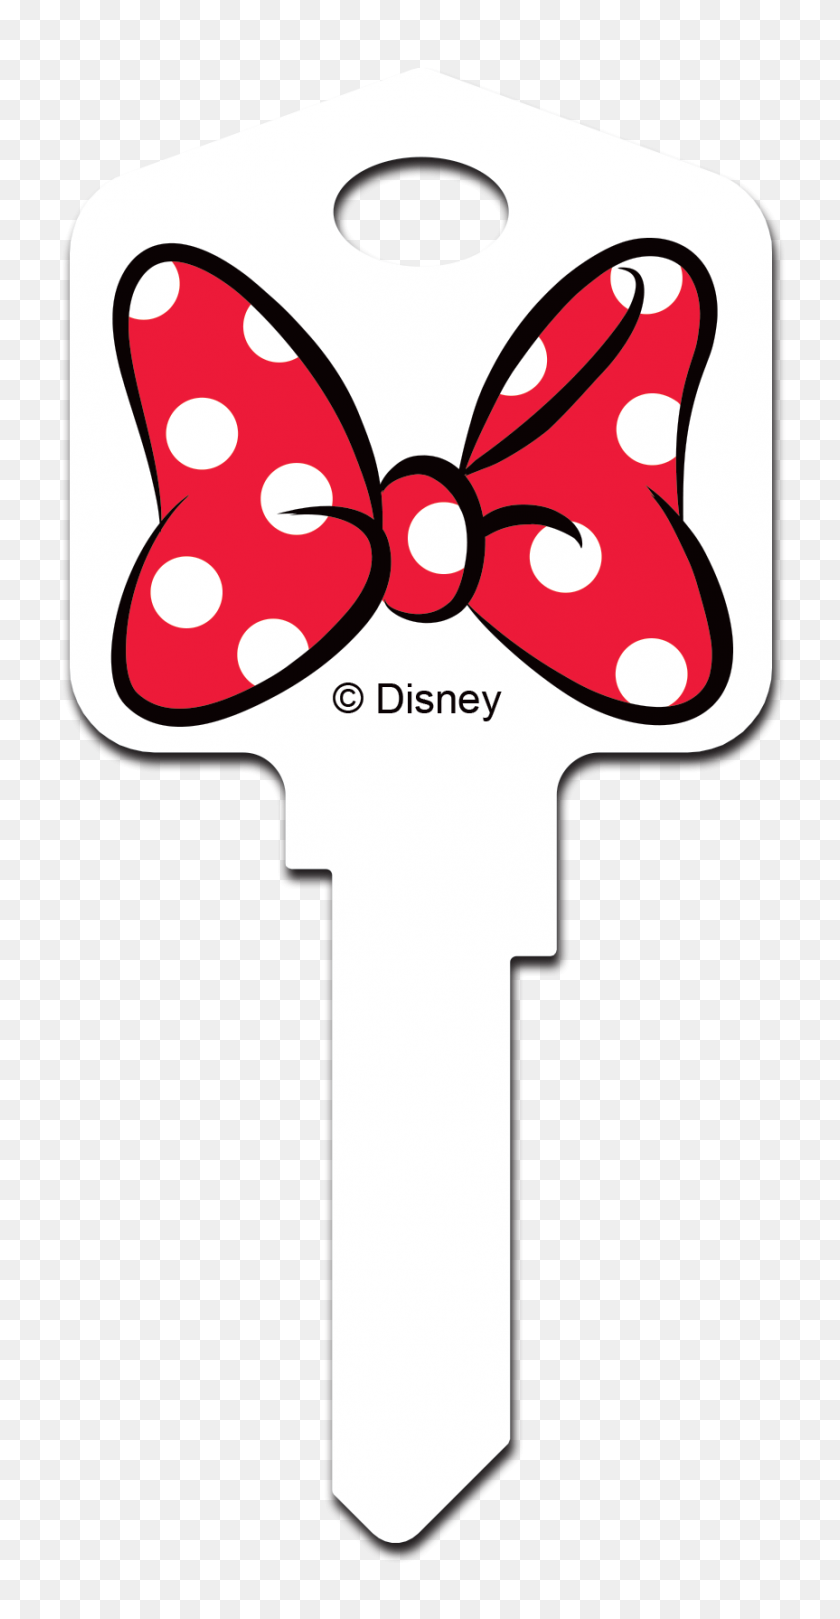 863x1725 Disney Minnie Mouse Bow House Key - Minnie Mouse Bow PNG